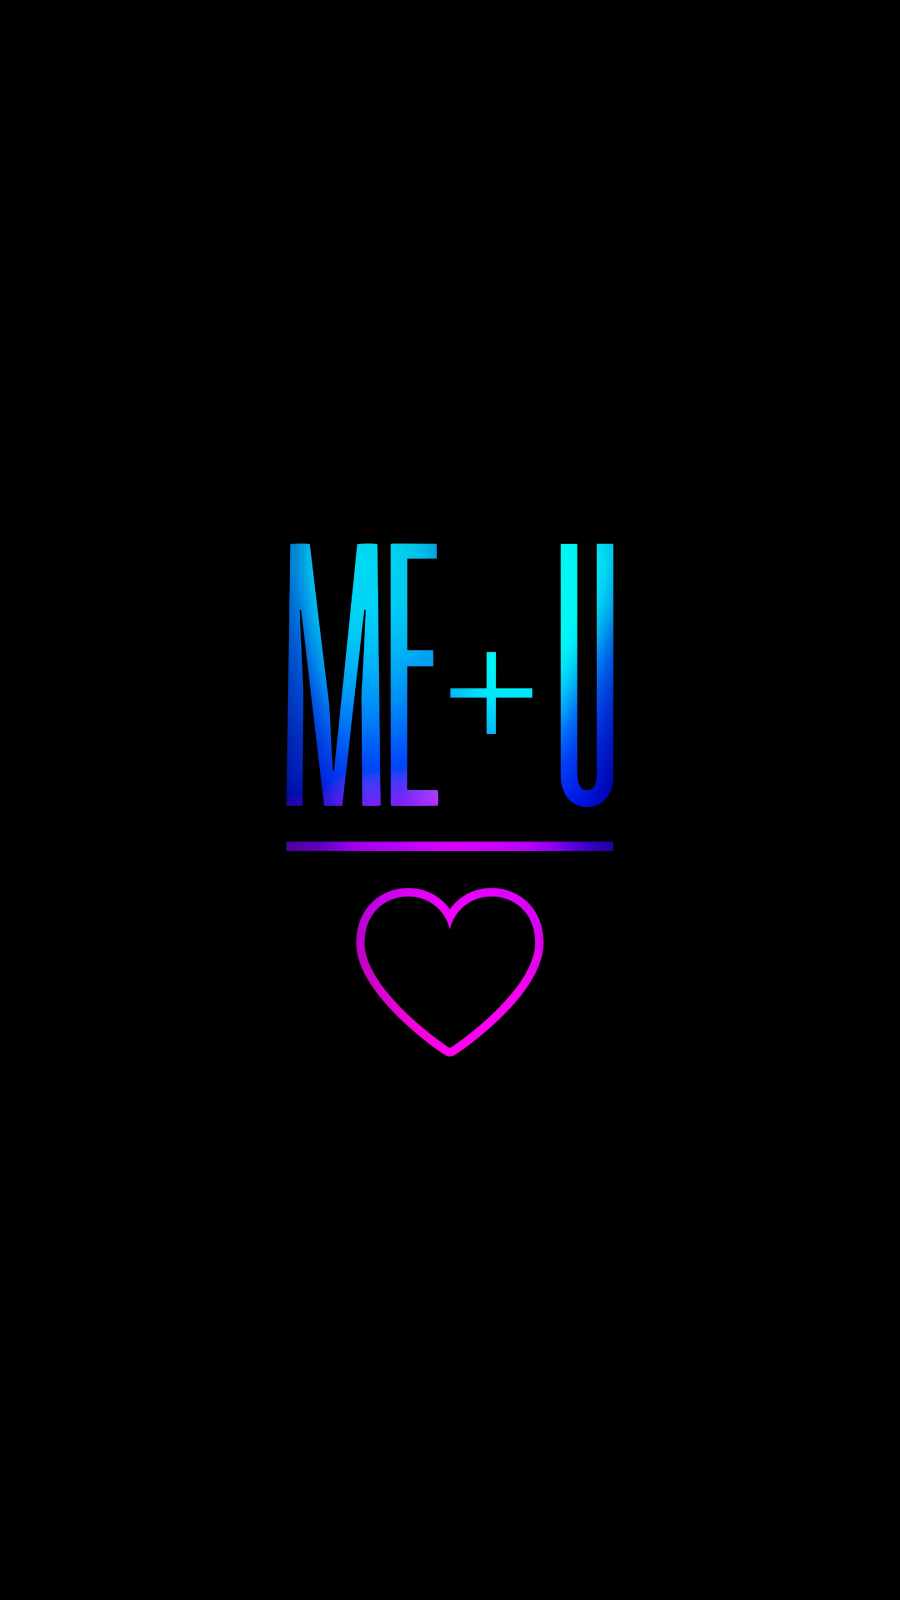 Me You Love IPhone Wallpaper - IPhone Wallpapers : iPhone Wallpapers